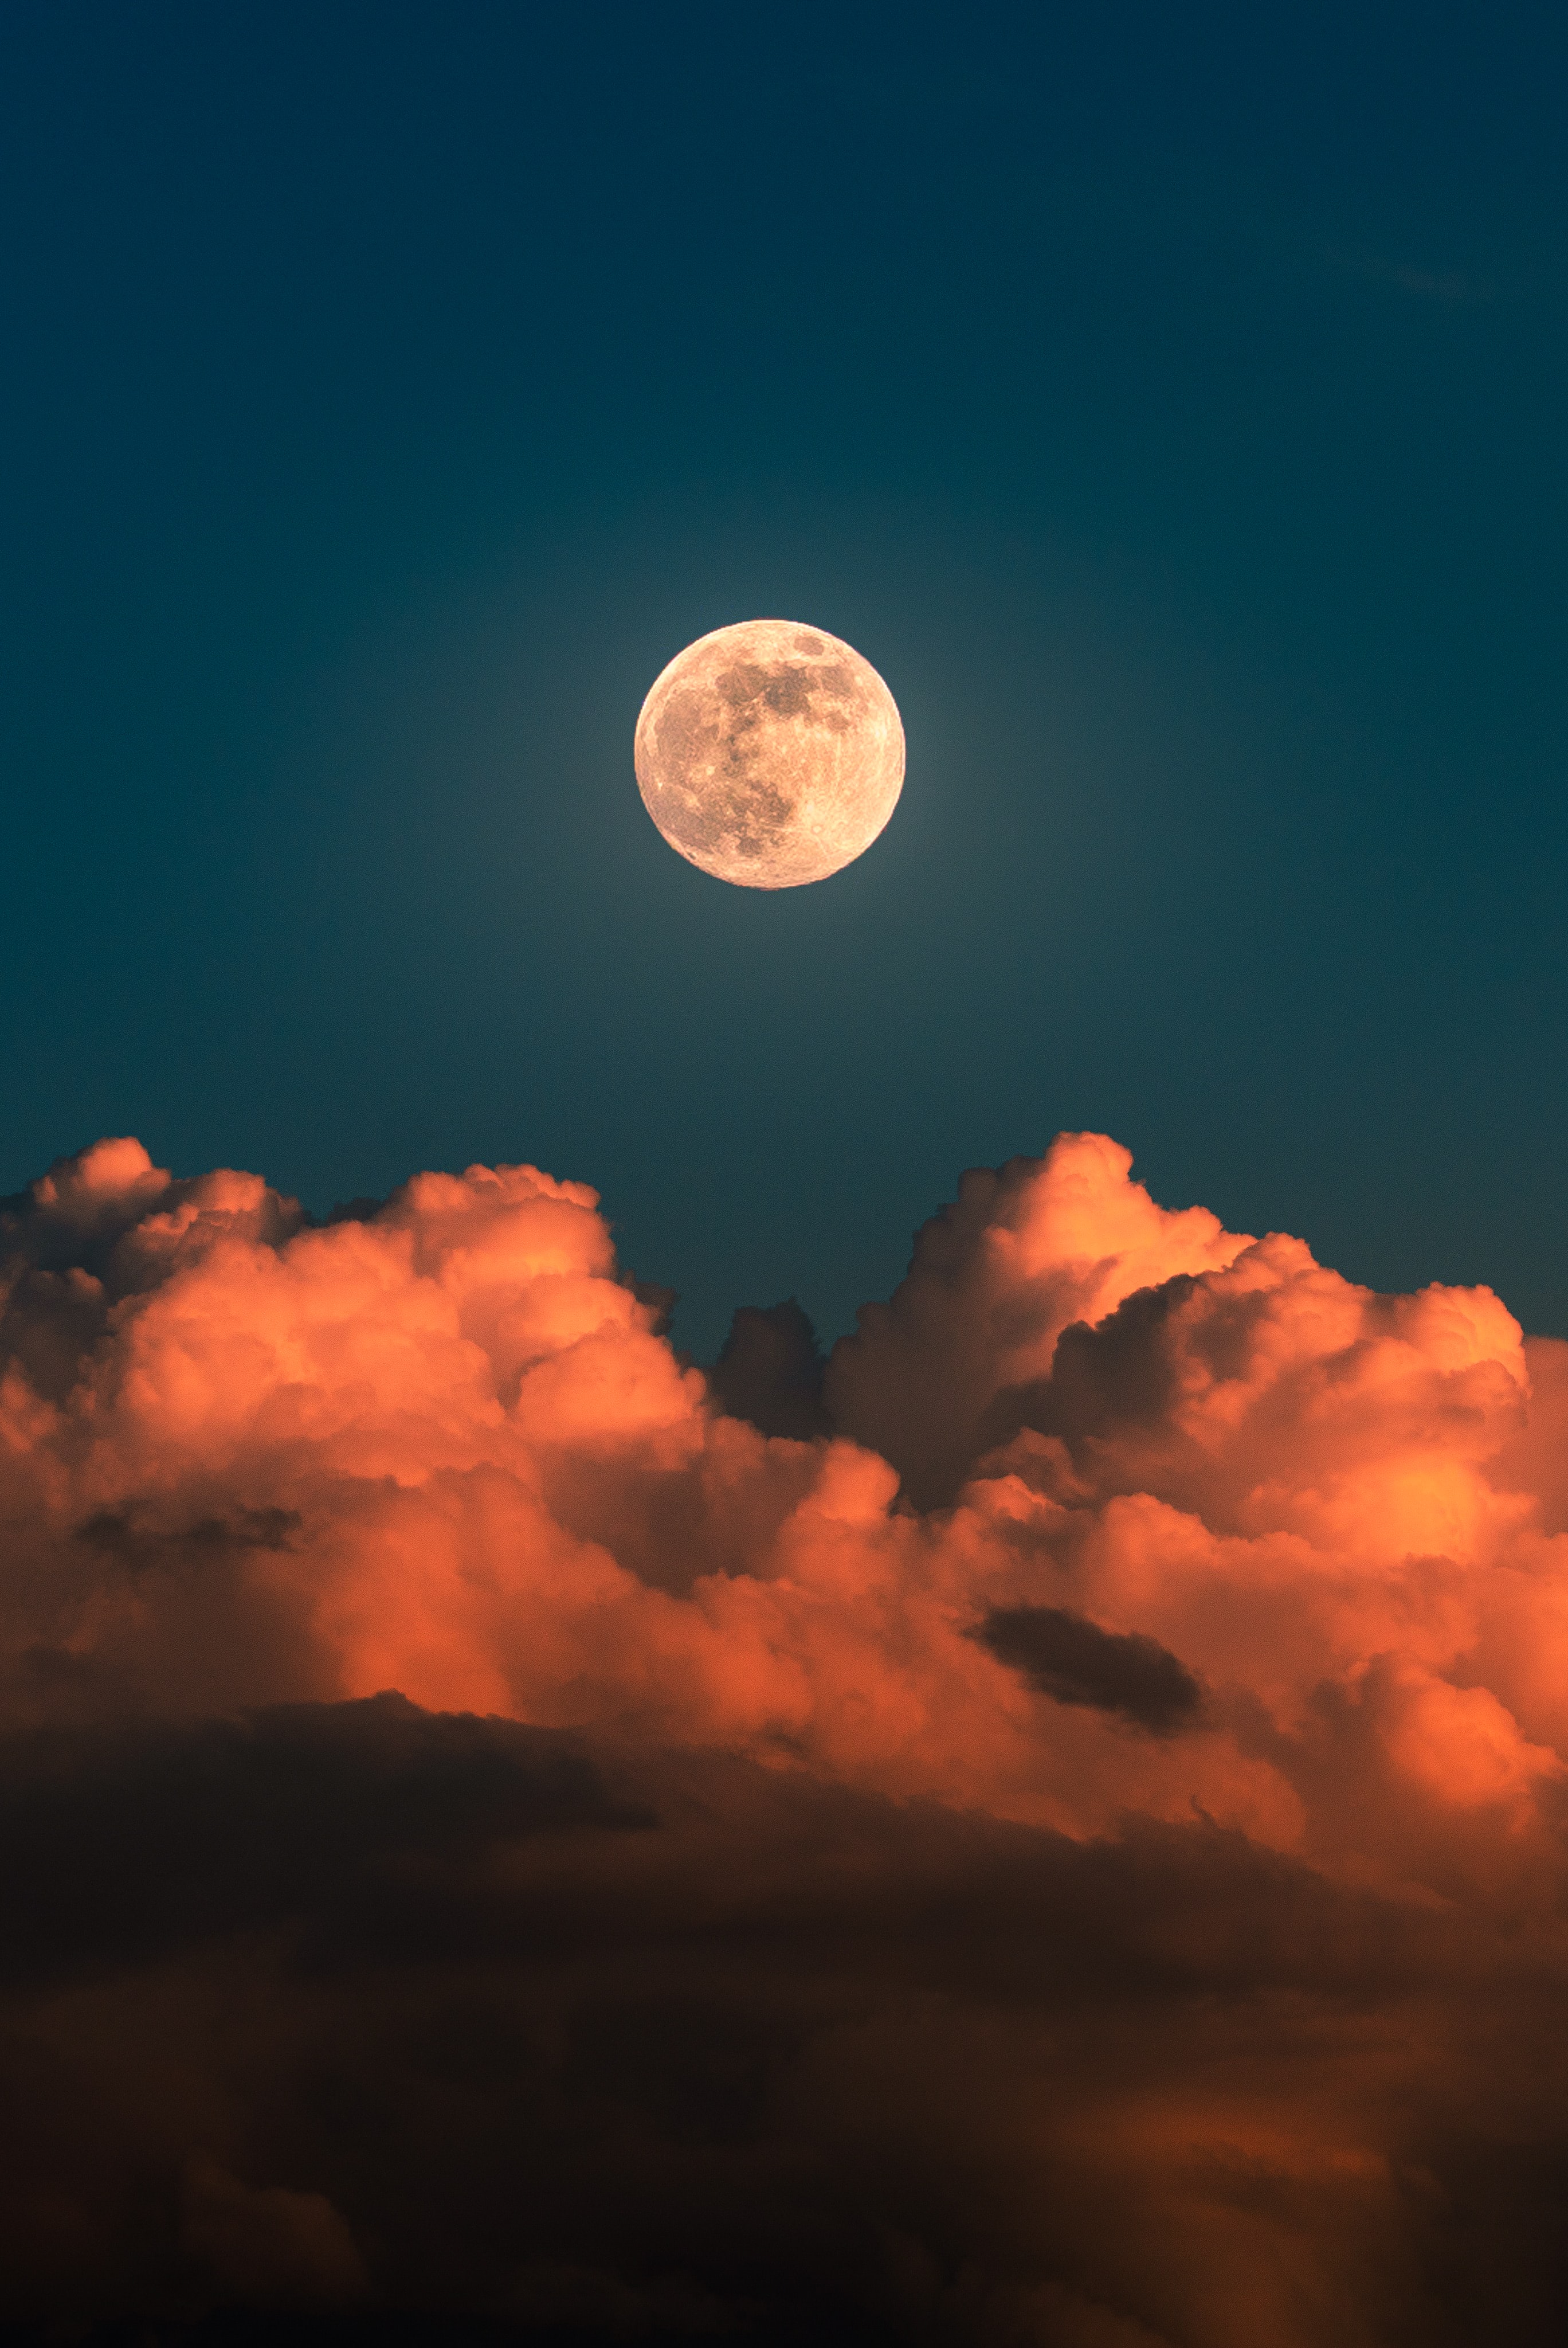 Free HD moon, clouds, full moon, nature, sky